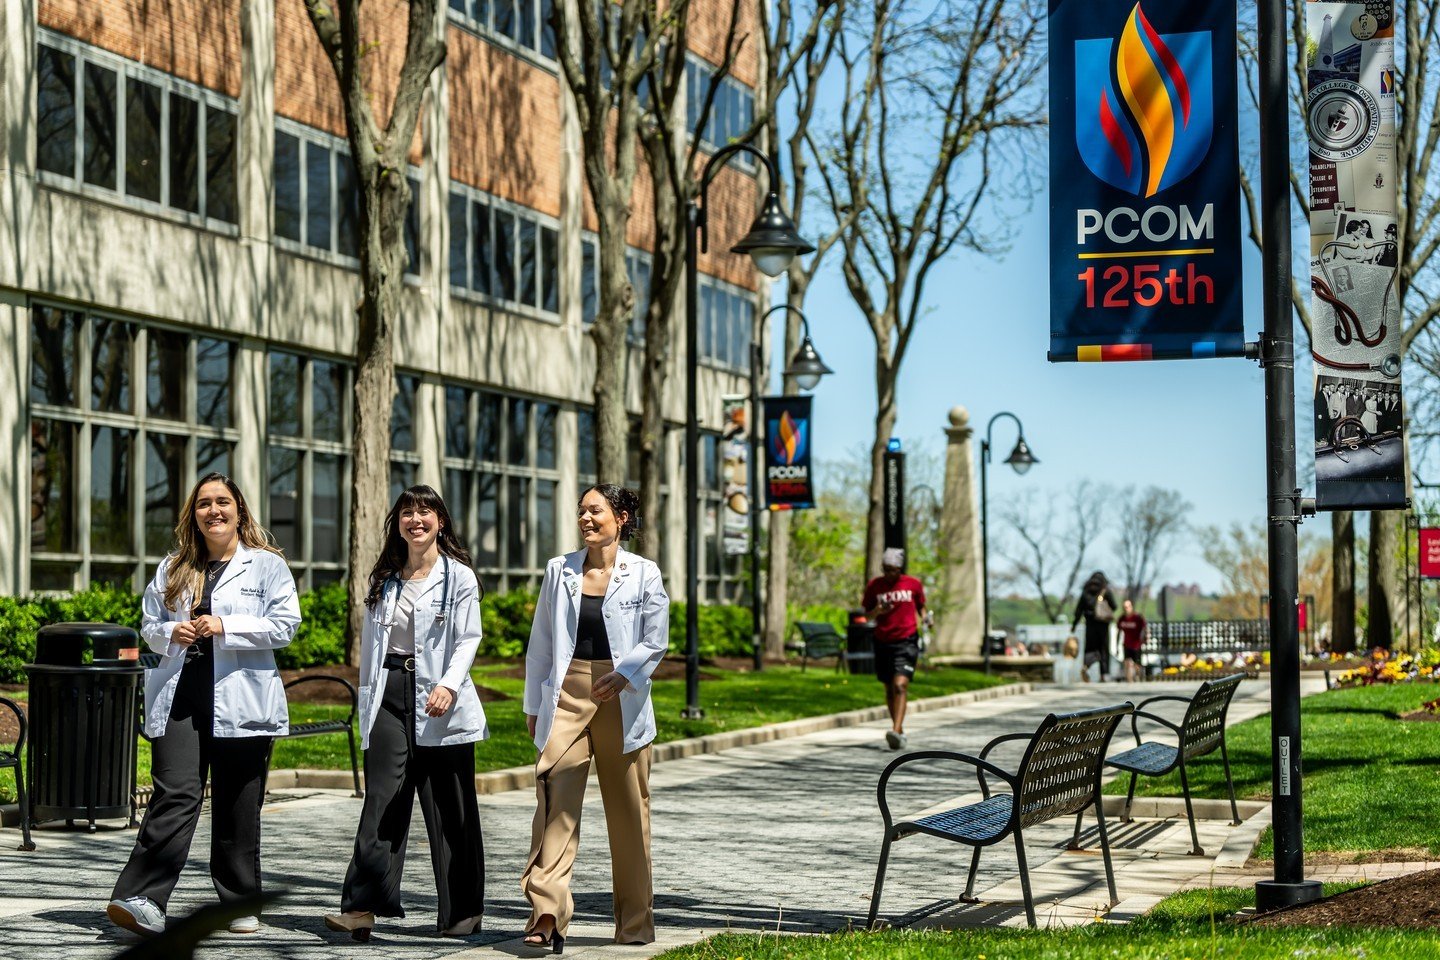 A little Spring refresh for our friends at Philadelphia College of Osteopathic Medicine. @pcomeducation

#brandingphotography #branding #lifestylephotography #philadelphia